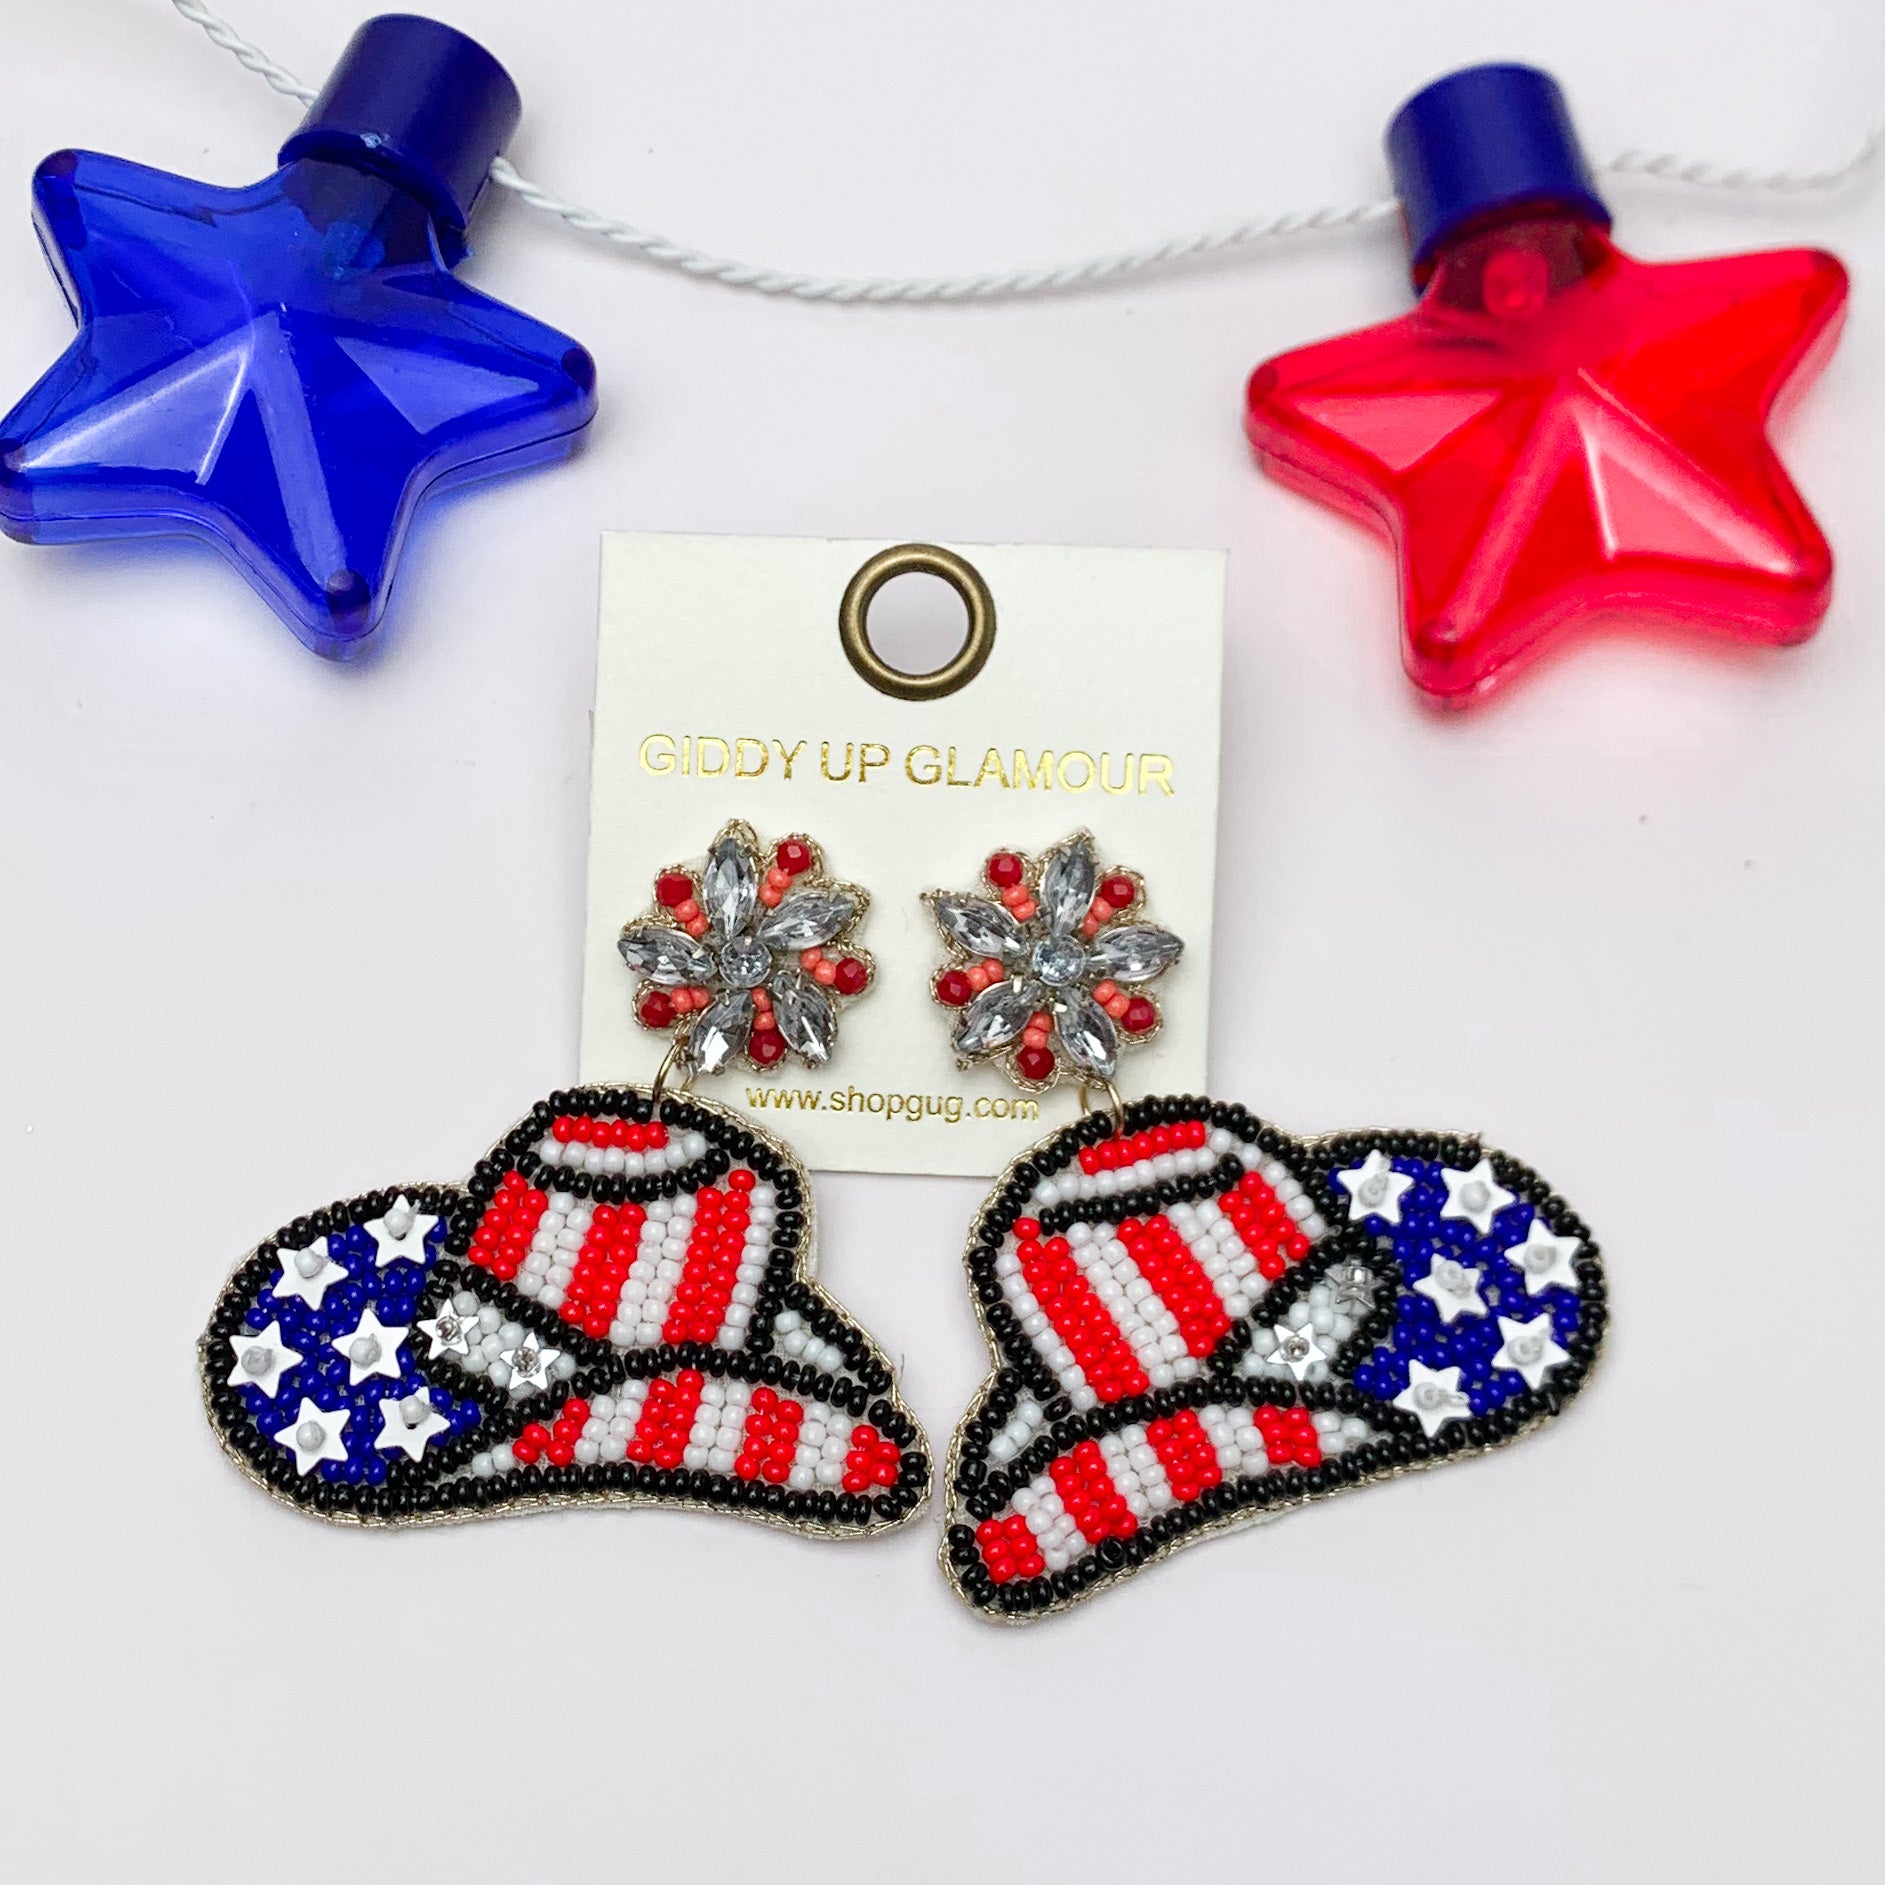 Patriotic Cowboy Hat Beaded Earrings. Pictured on a white background with a red and blue star above the earrings for decoration.